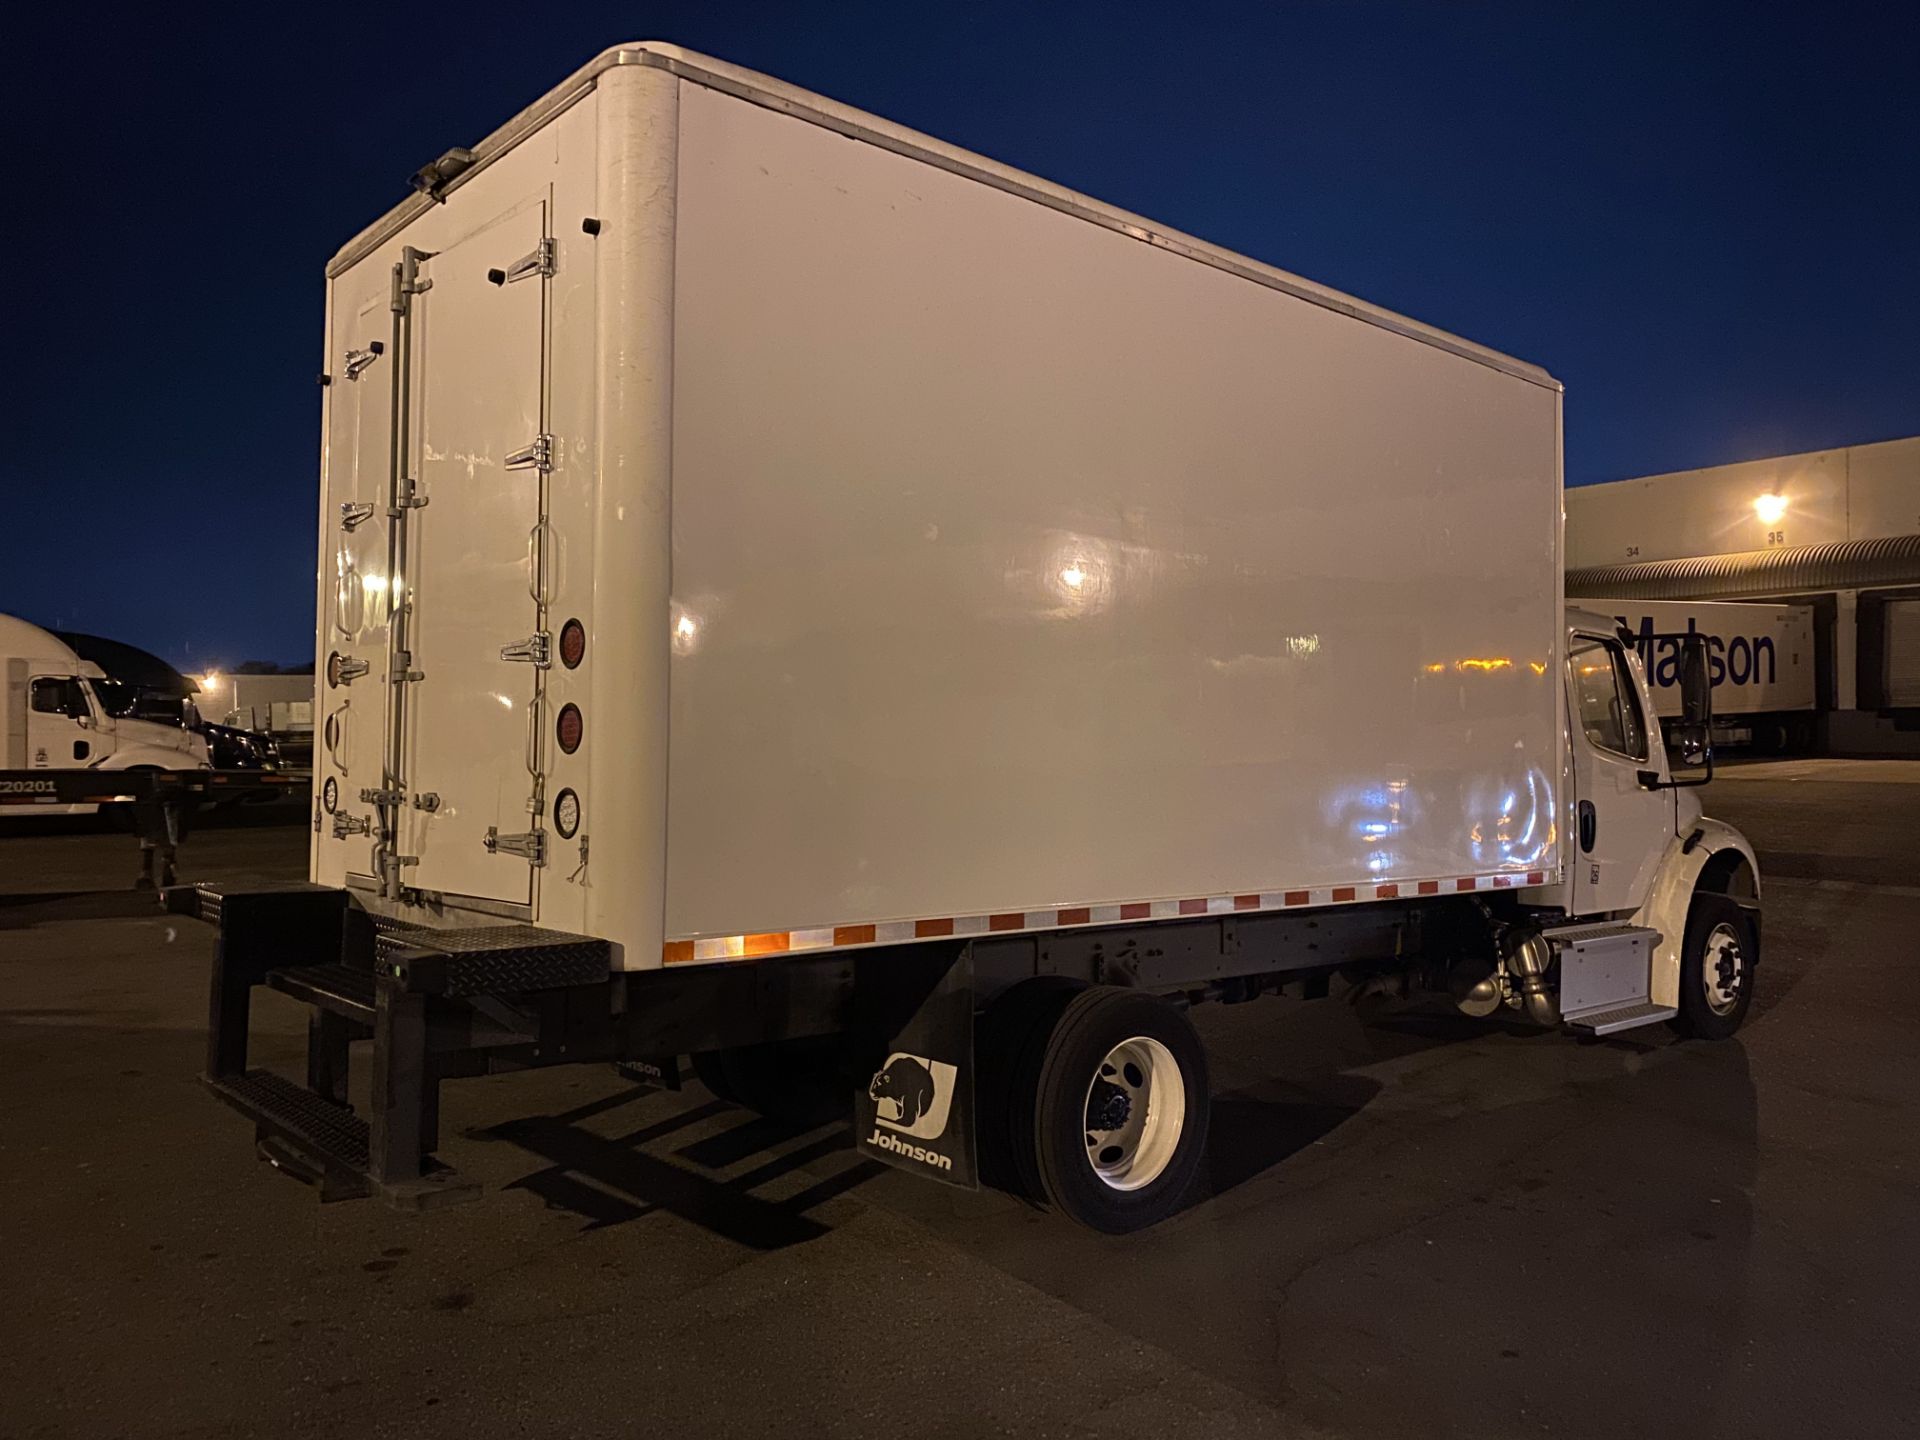 2017 Freightliner refrigerated truck - Image 2 of 9